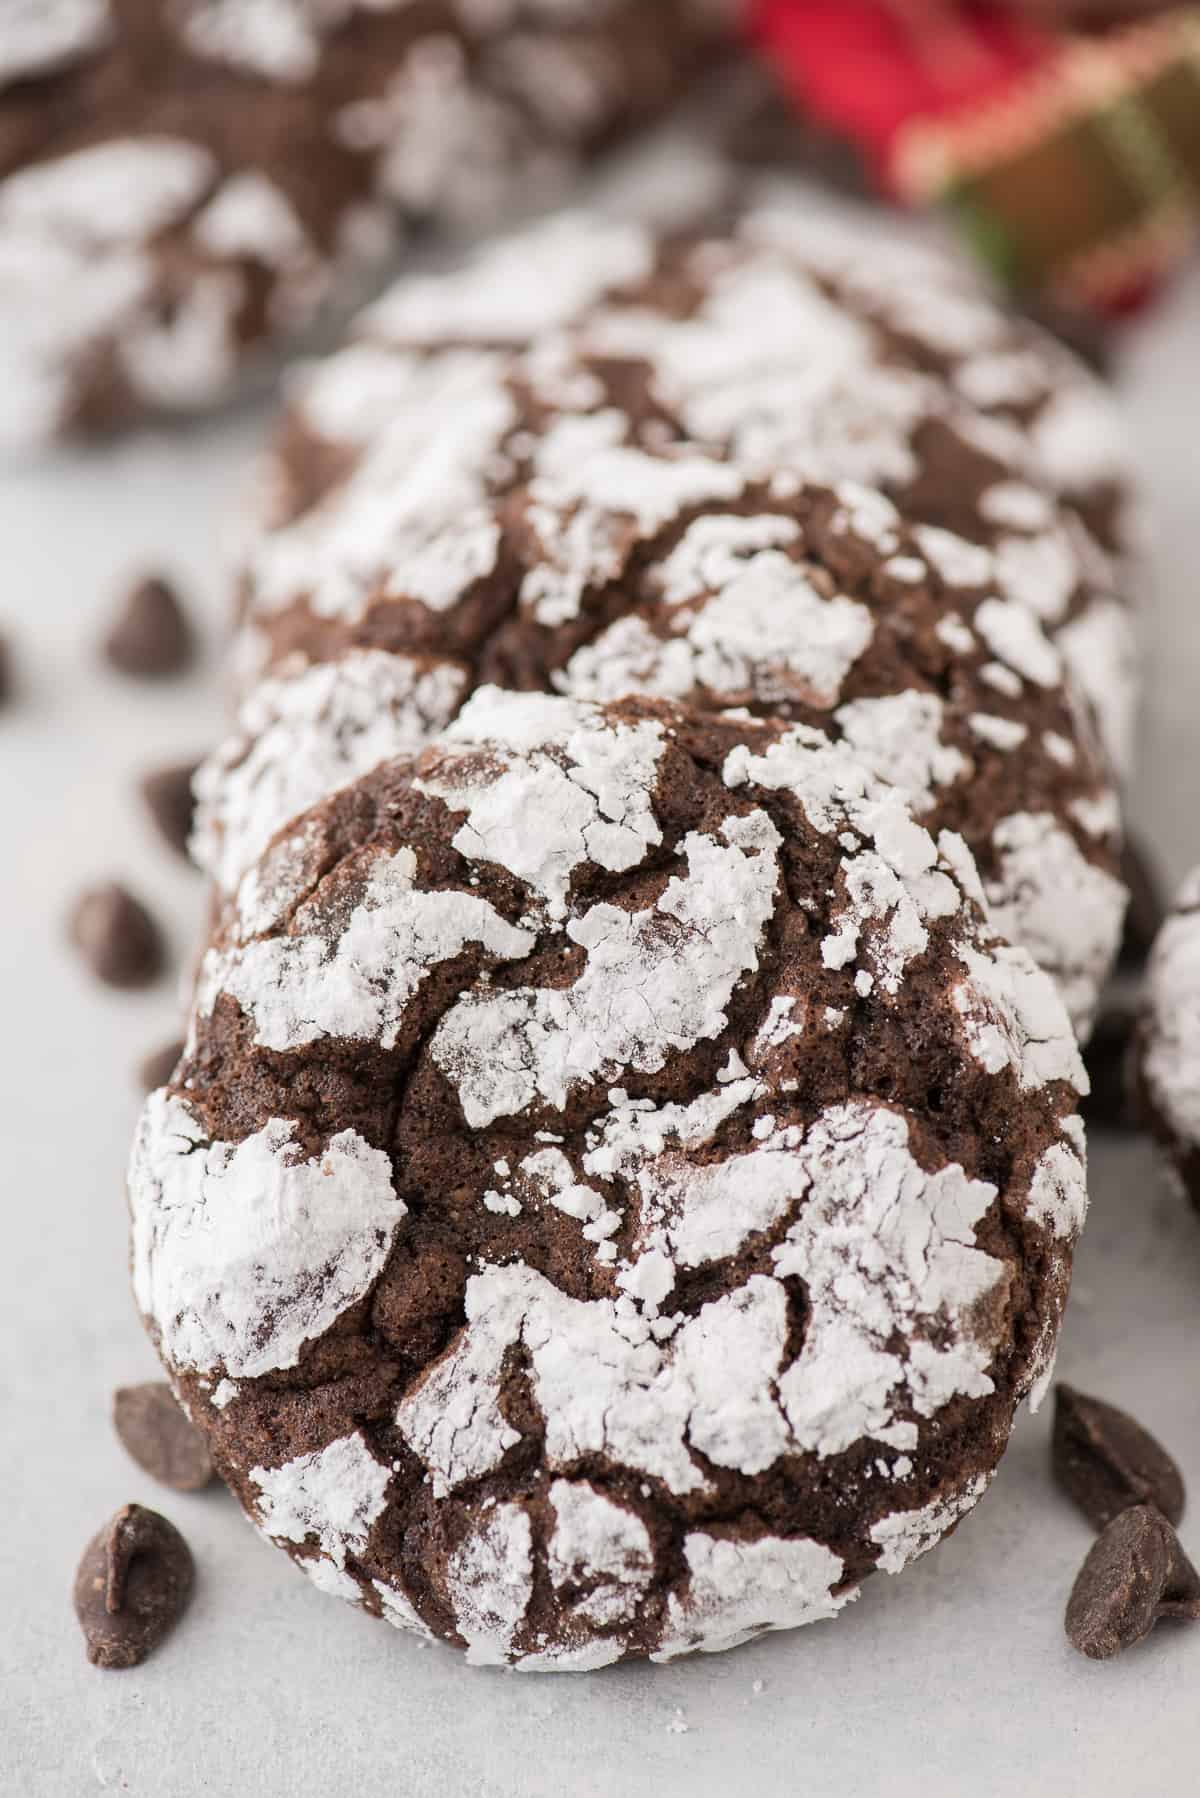 chocolate crinkle cookies rolled in powdered sugar displayed on gray surface